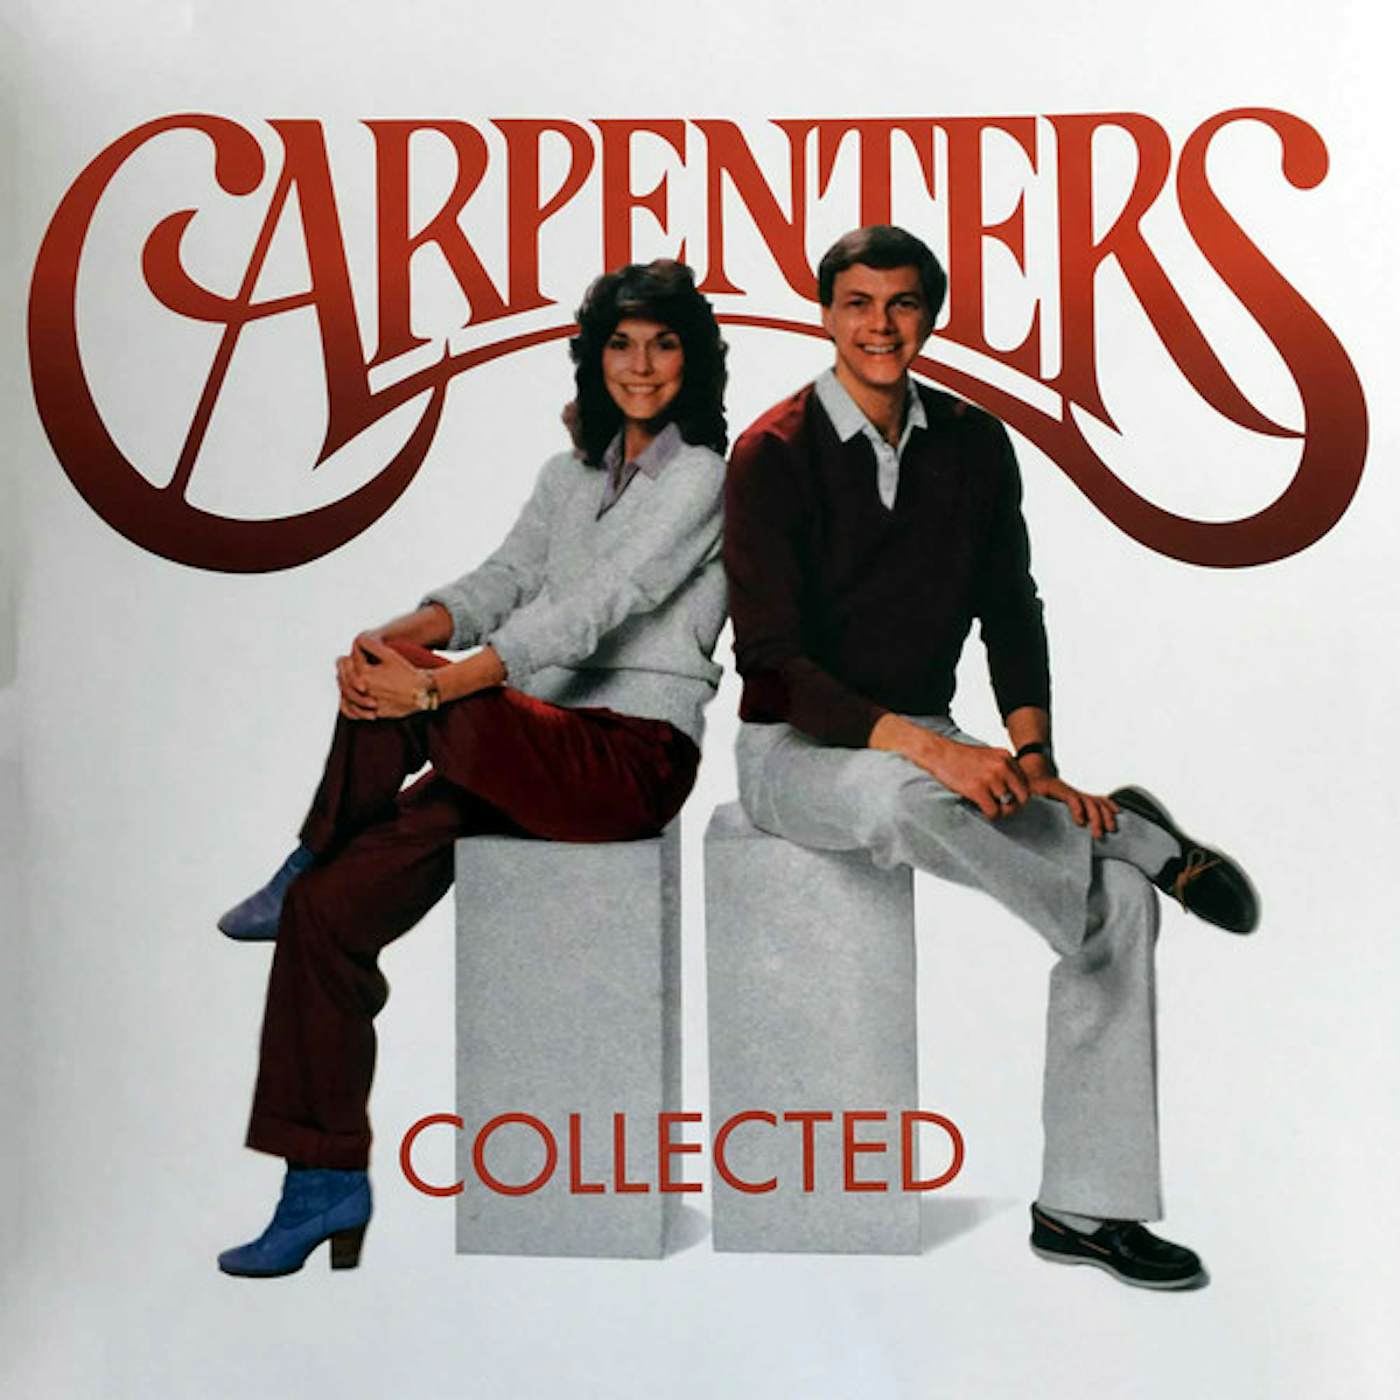 Carpenters COLLECTED (2LP/180G/PVC SLEEVE/BOOKLET/IMPORT) Vinyl Record